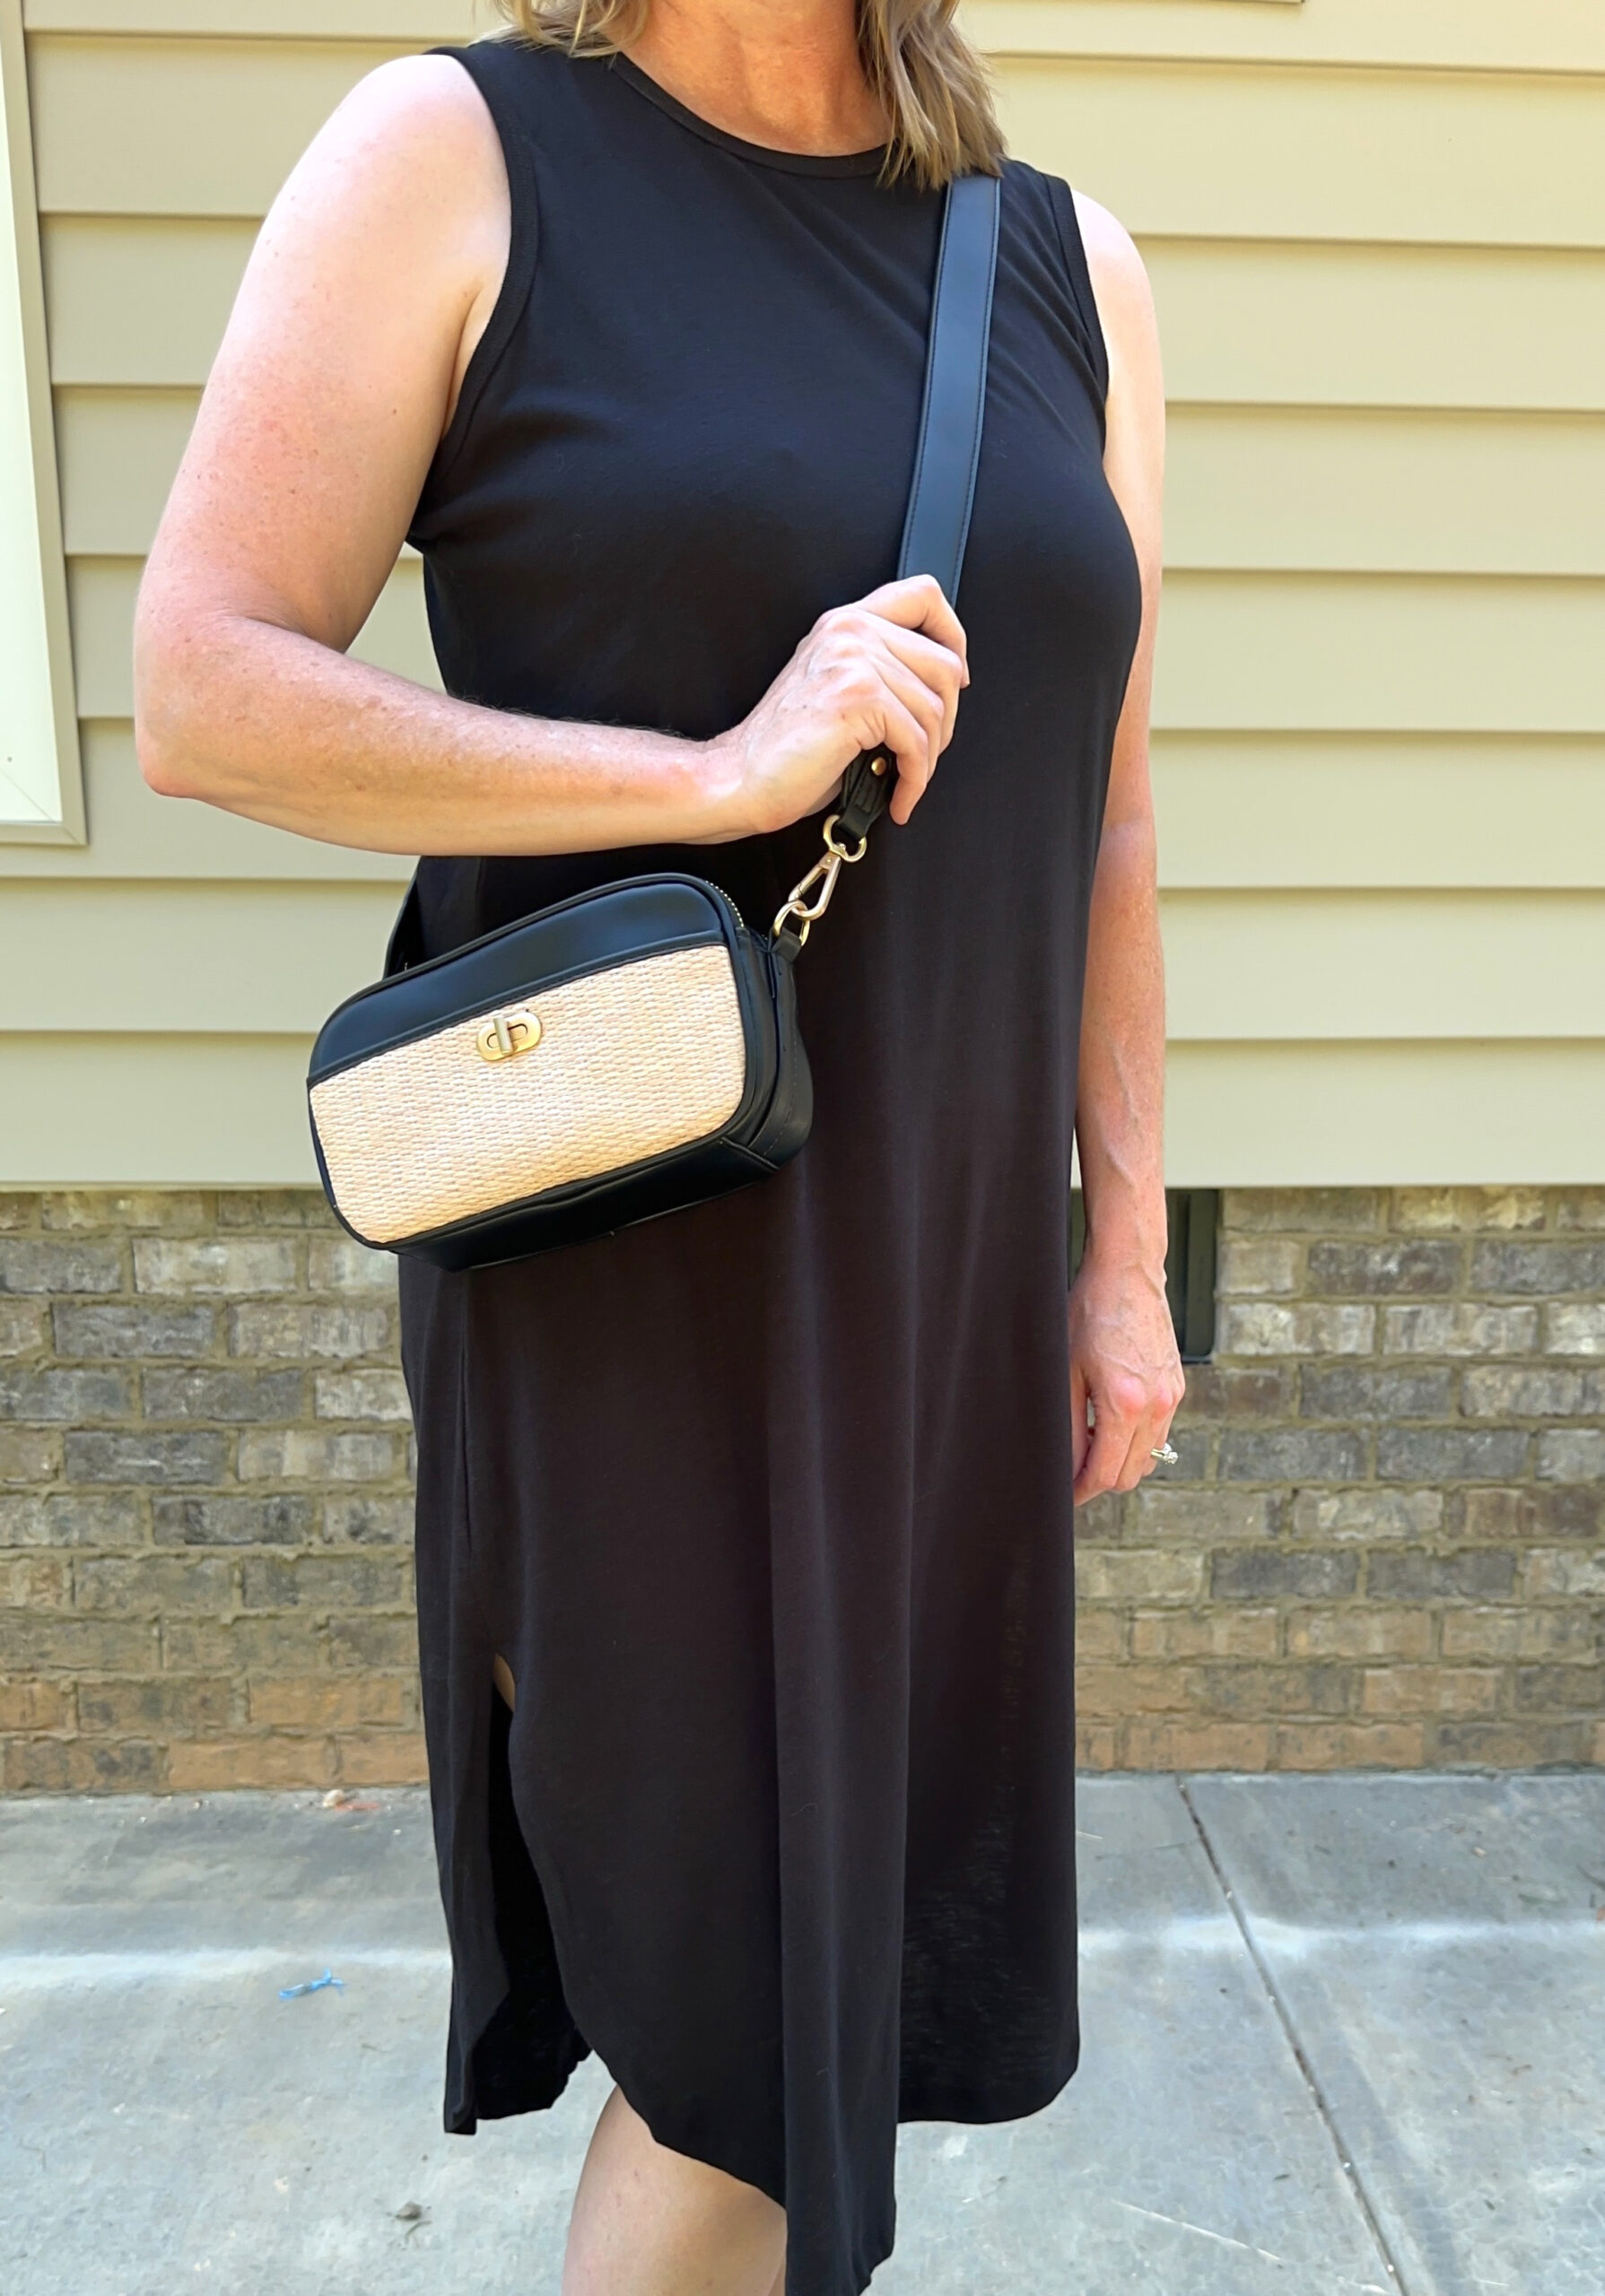 3 Essentials To Include In Your Travel Wardrobe - Outfit 1 crossbody bag